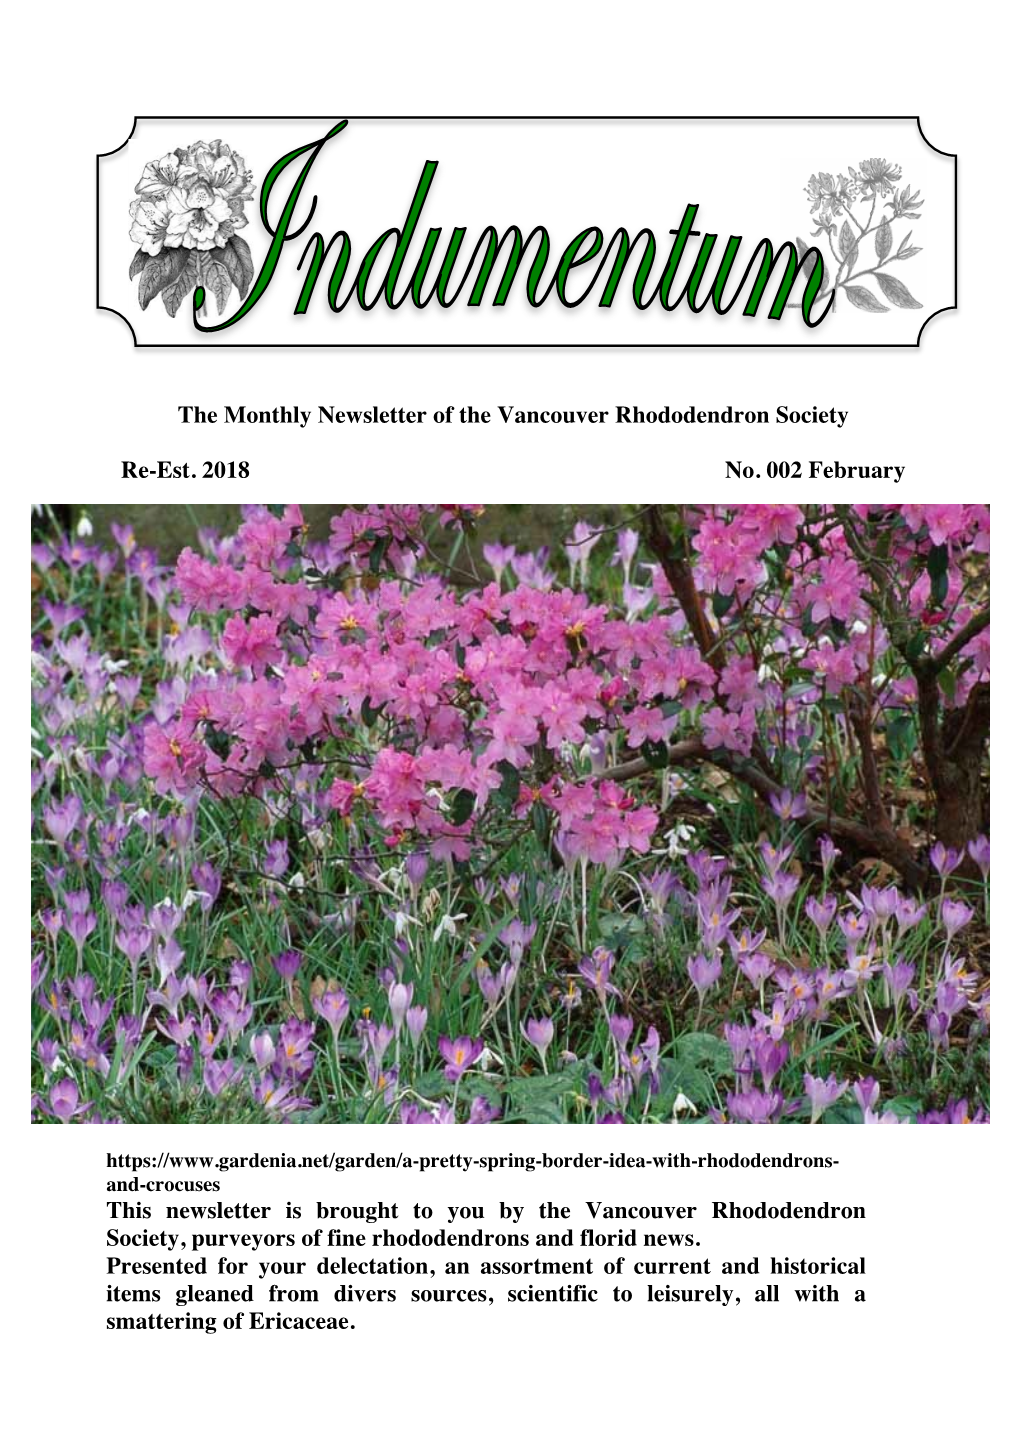 The Monthly Newsletter of the Vancouver Rhododendron Society